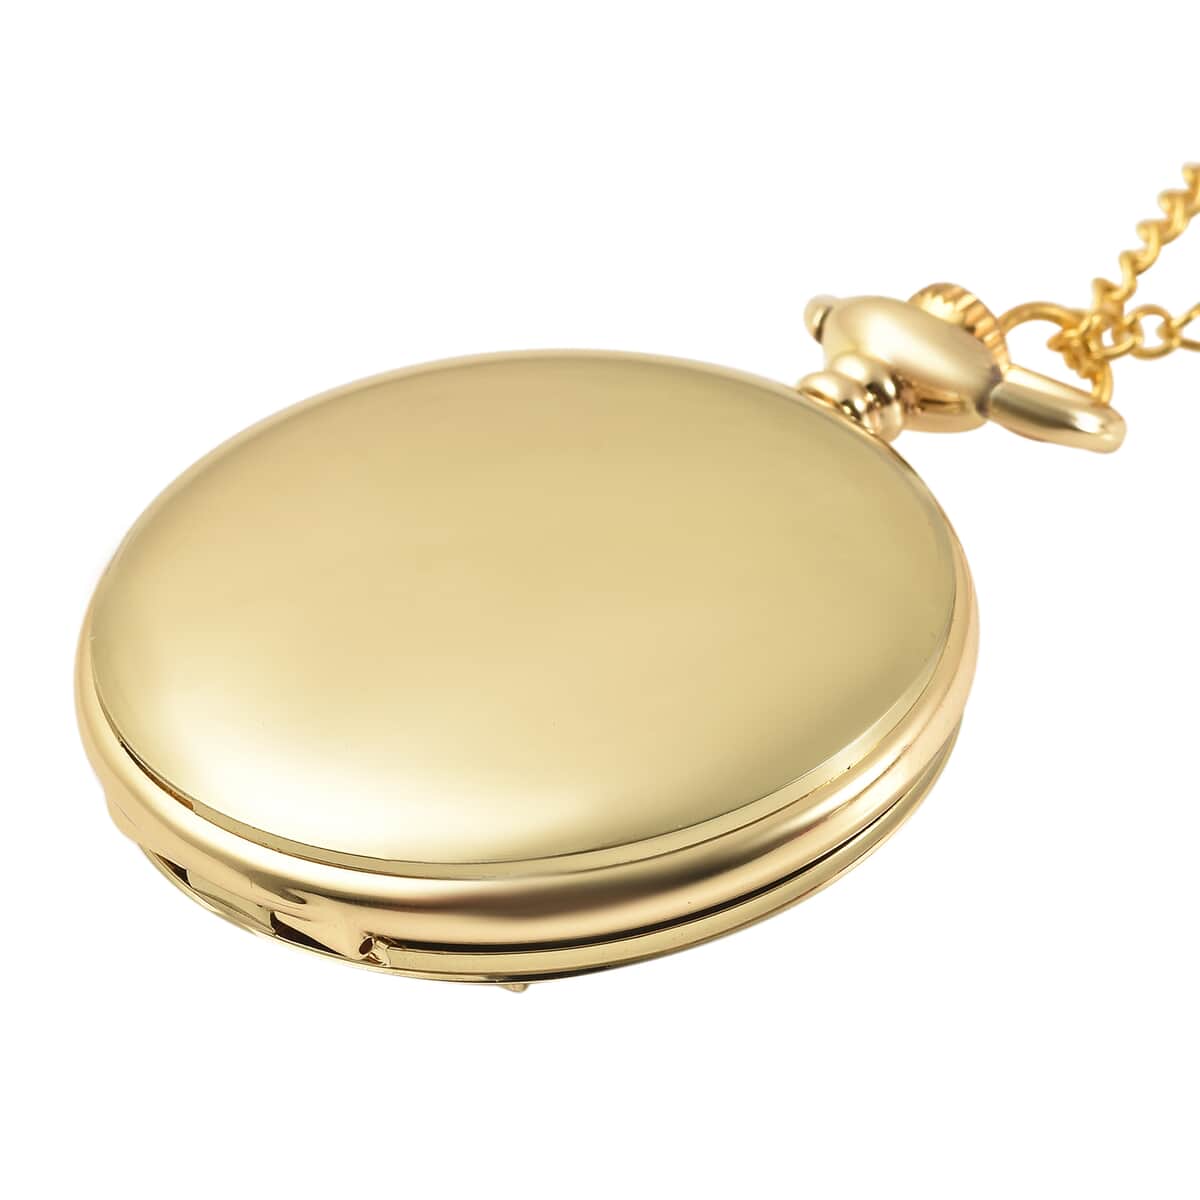 Strada Japanese Movement Corgi Pocket Watch in Goldtone with Chain (31 Inches) image number 3